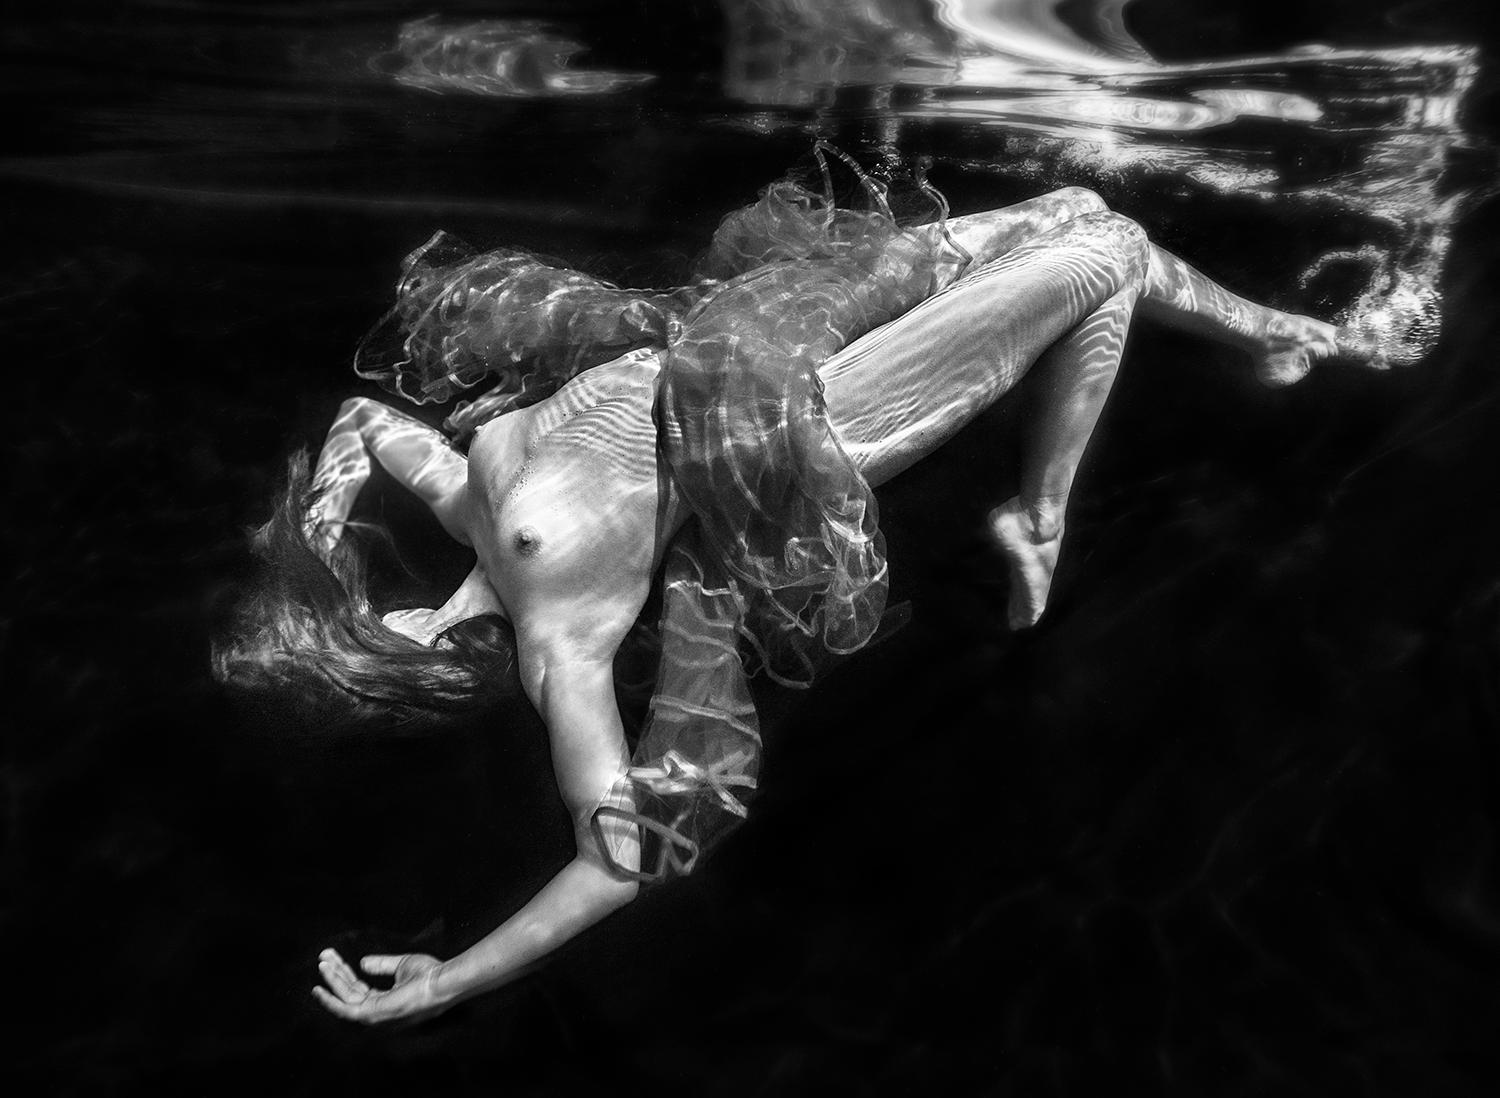 Infinity - underwater black and white nude photograph - archival paper 17